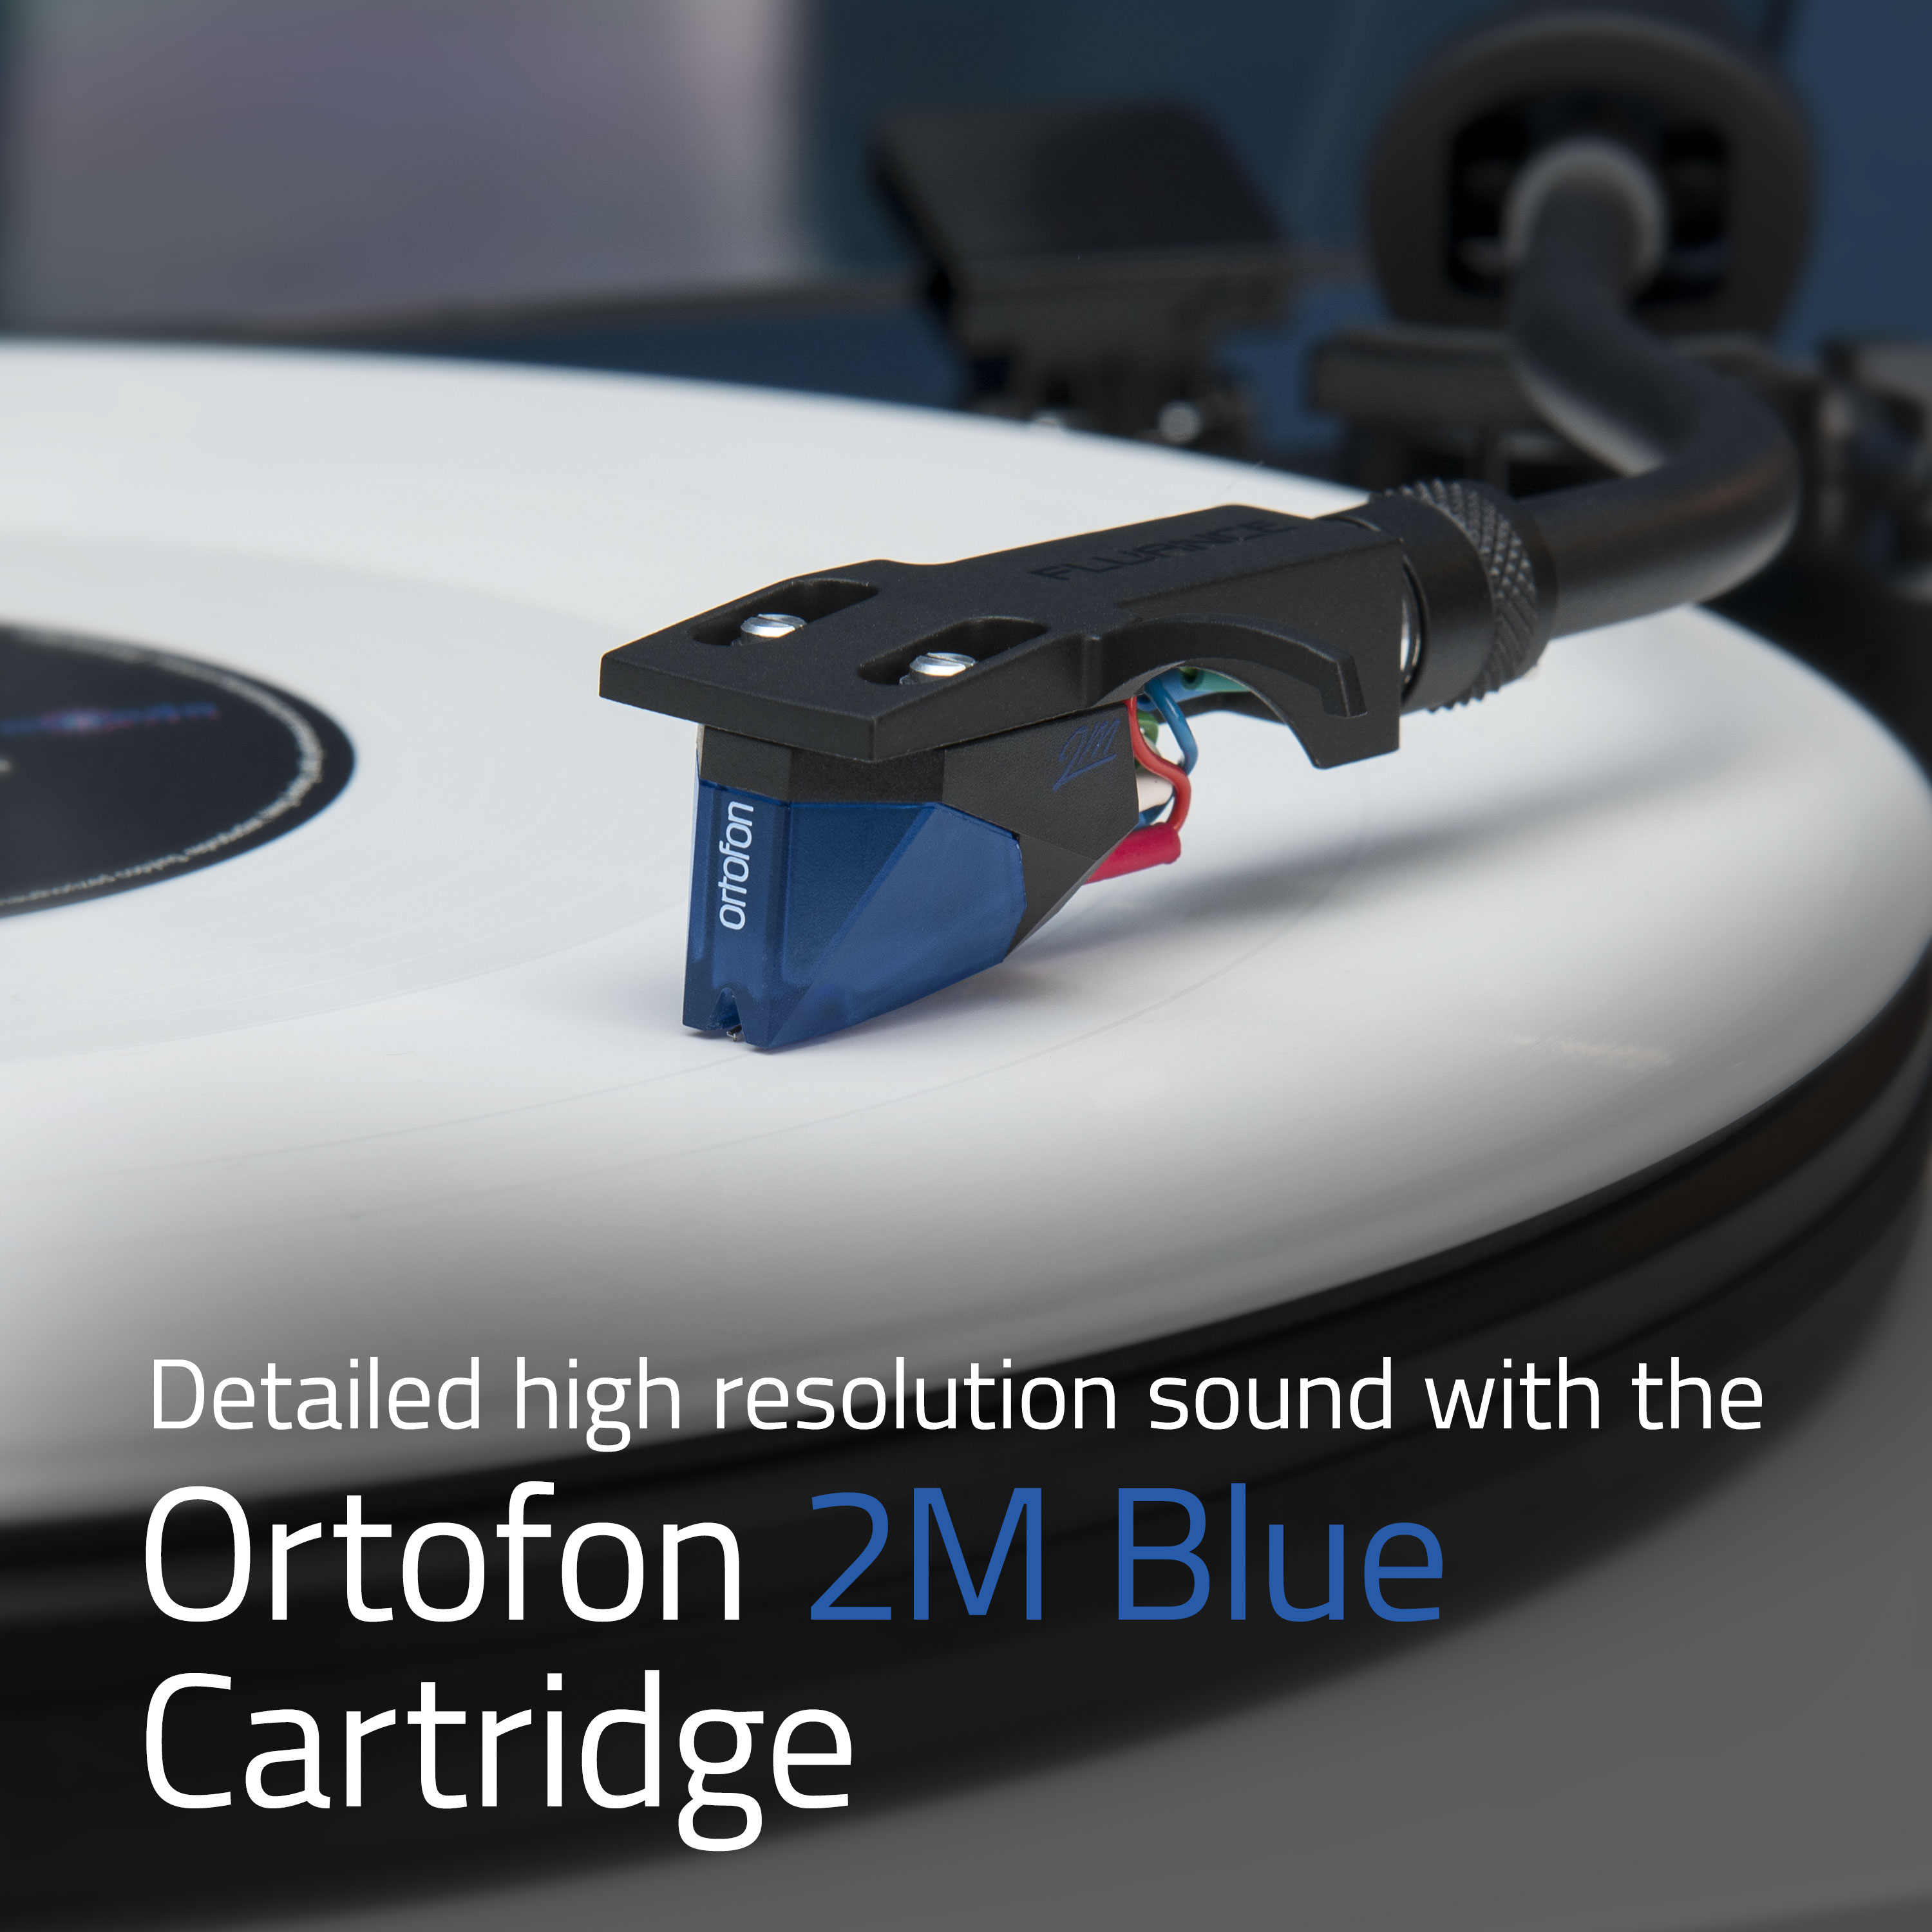 Motor，　Plinth，　Reference　Control　Player　Mass　Ortofon　High　Vib-　Fidelity　2M　Vinyl　MDF　with　Cartridge，　Turntable　Record　Blue　Wood　Speed　High　Fluance　RT84